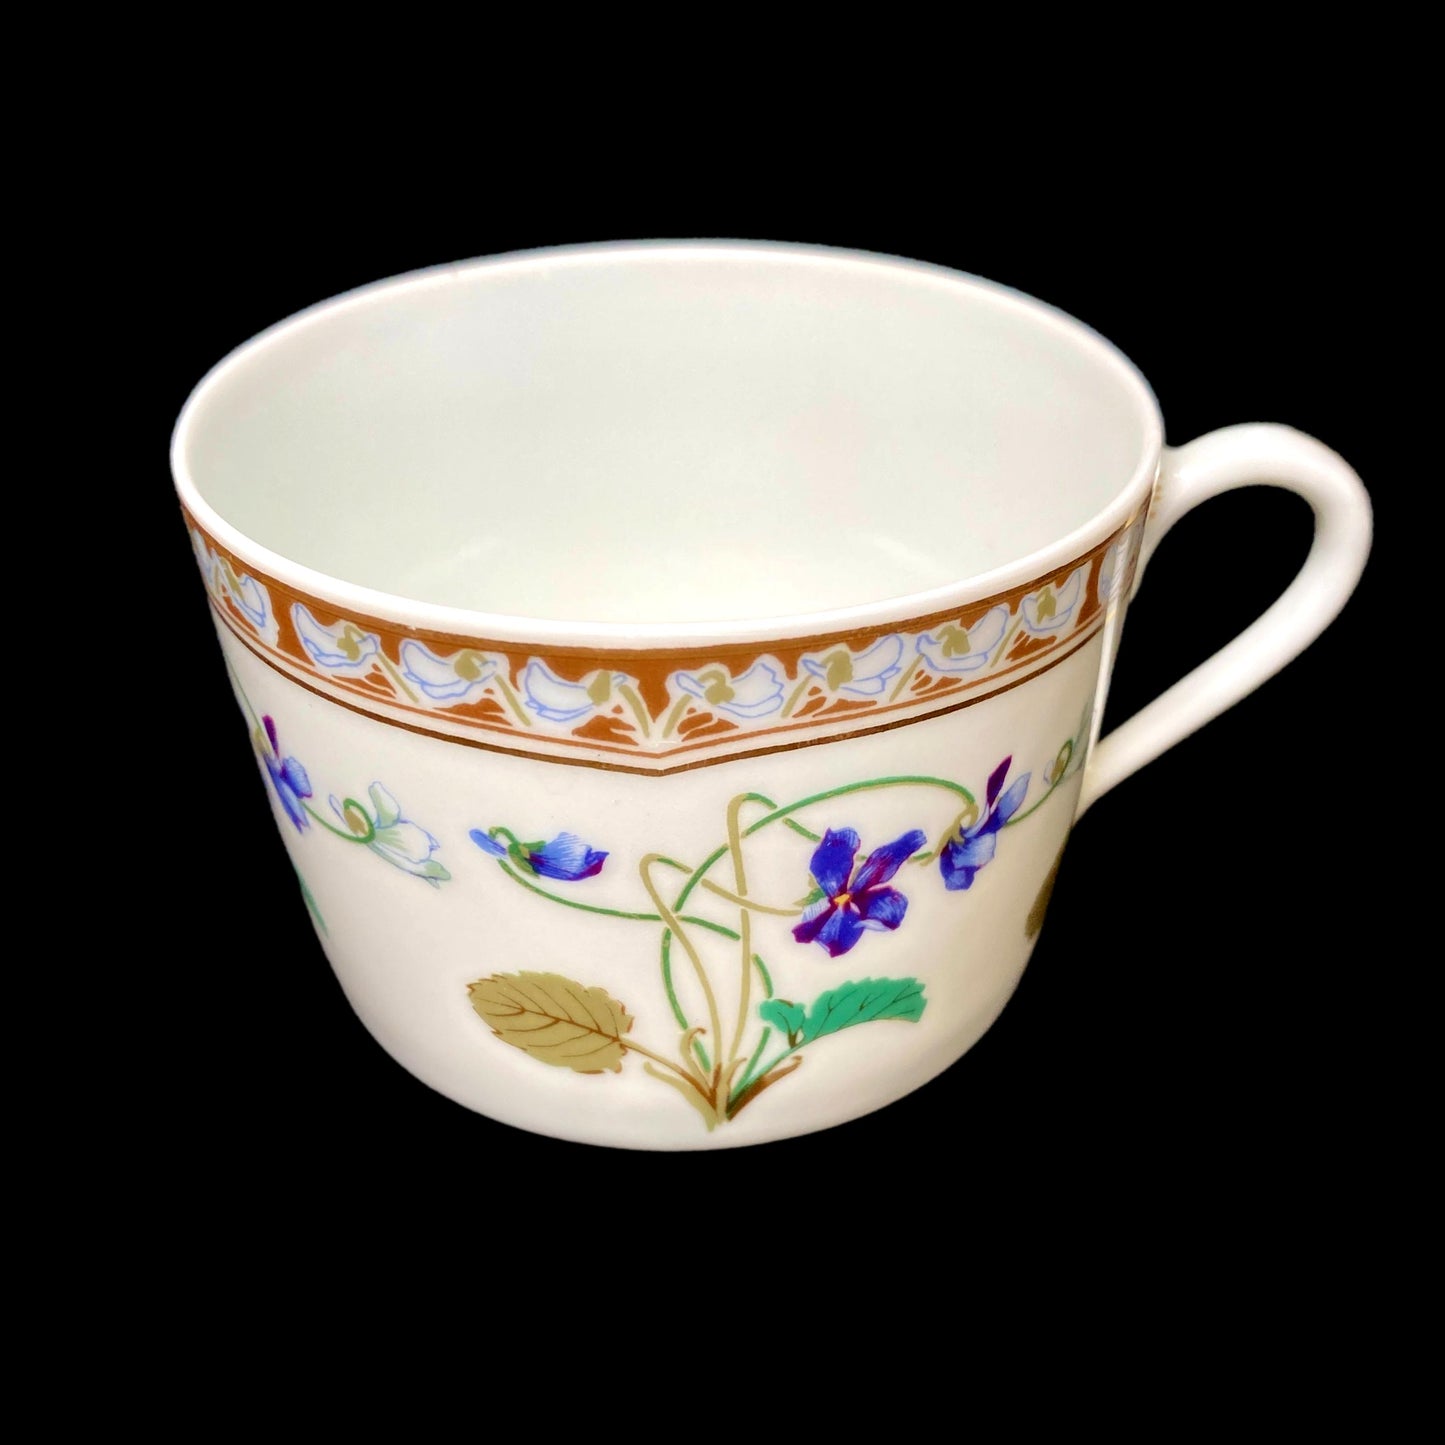 Haviland Limoges Imperatrice Eugenie Cappuccino Cup & Saucer